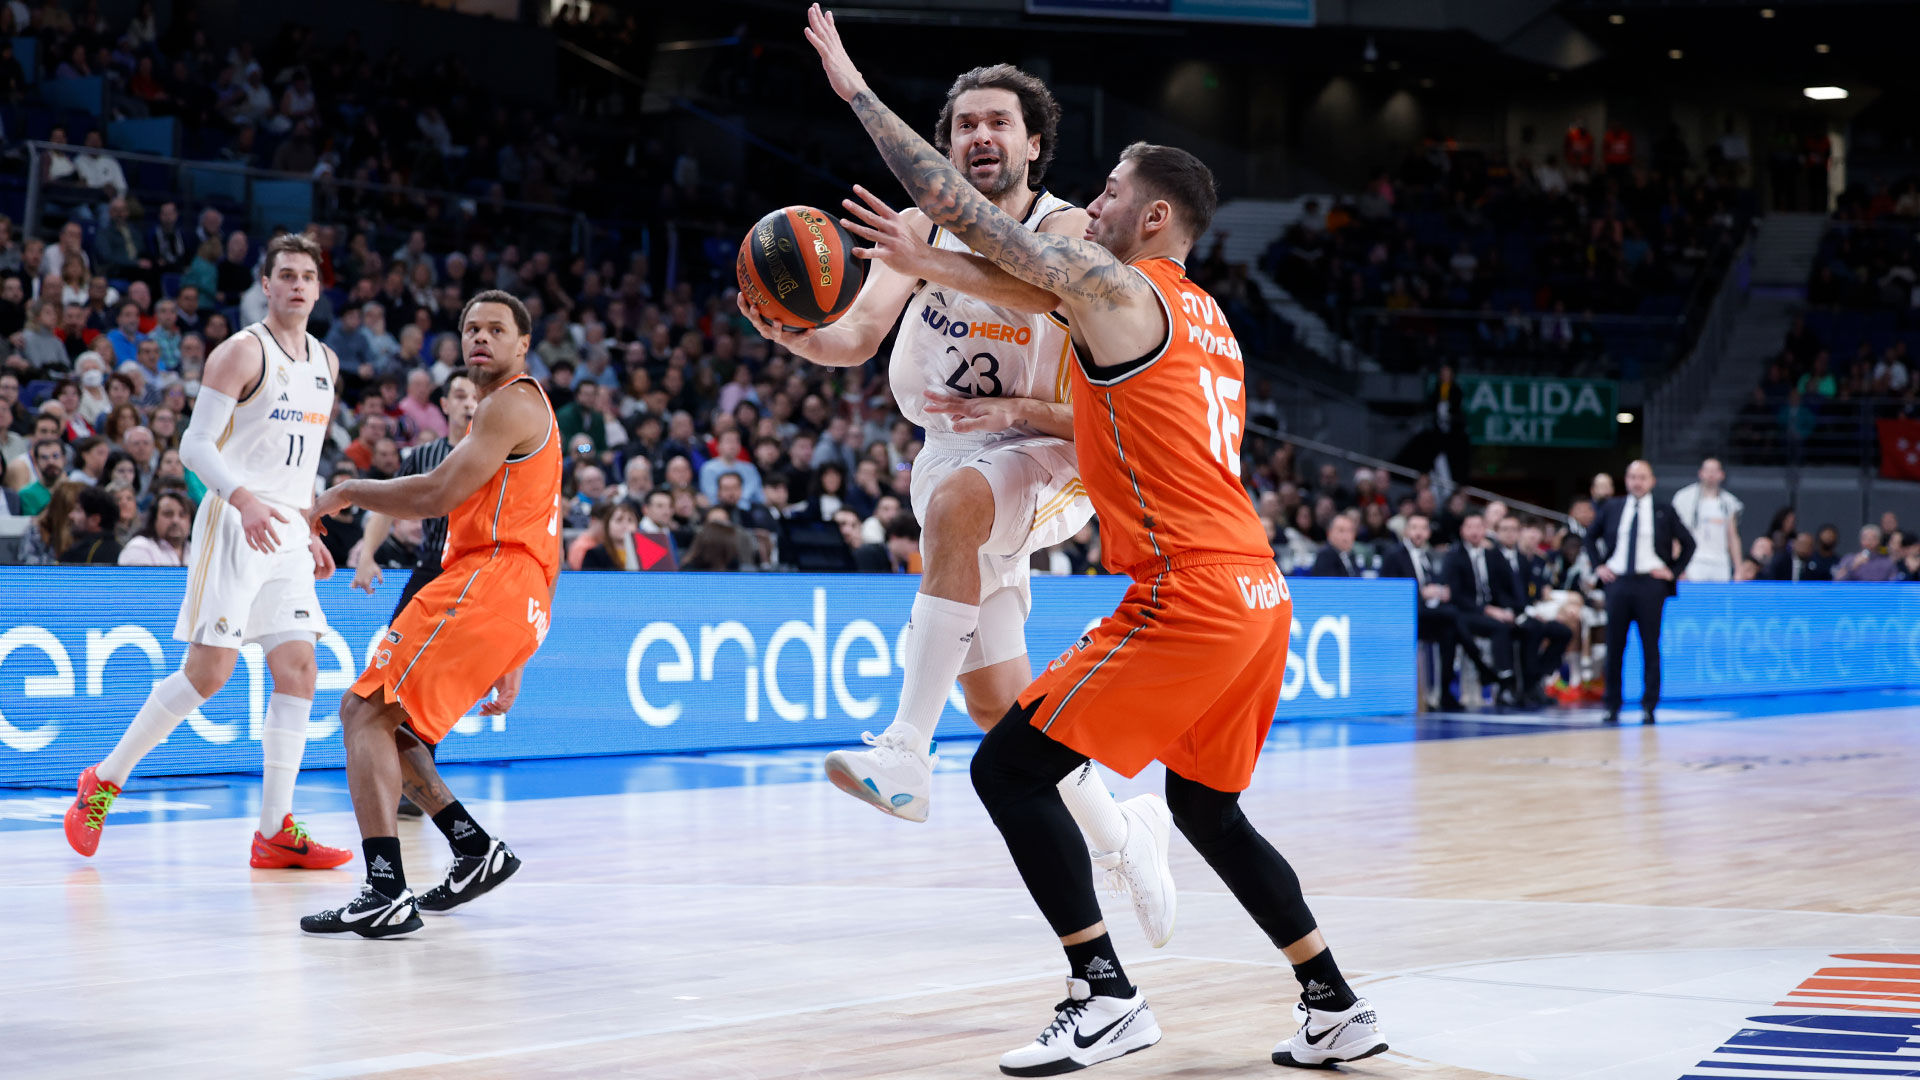 Valencia Basket-Real Madrid: a decisive league double-header gets underway